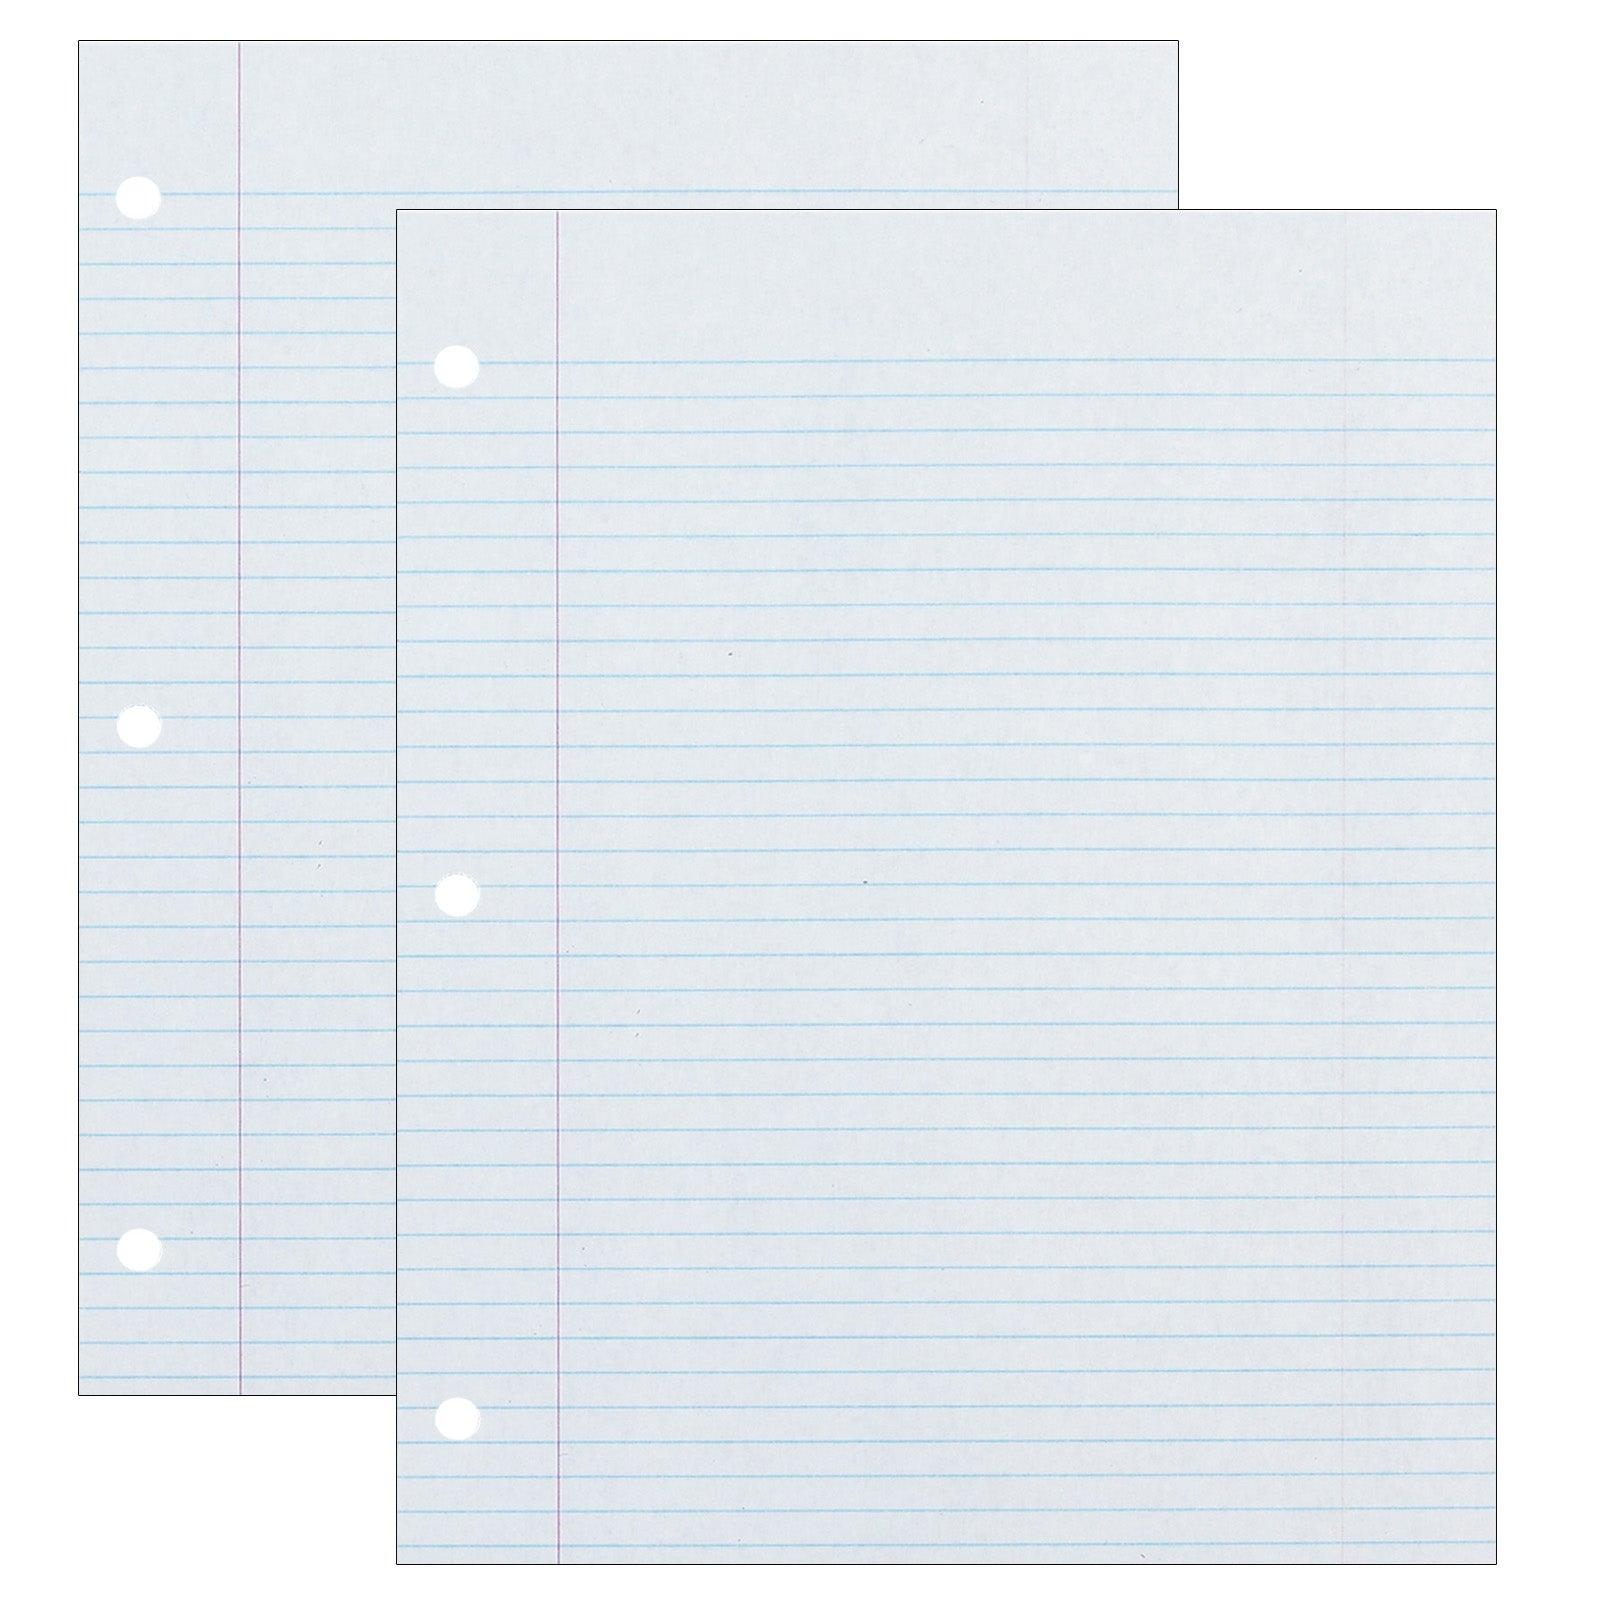 Recycled Filler Paper, White, 3-Hole Punched, 9/32" Ruled w/ Margin 8-1/2" x 11", 500 Sheets Per Pack, 2 Packs - Loomini